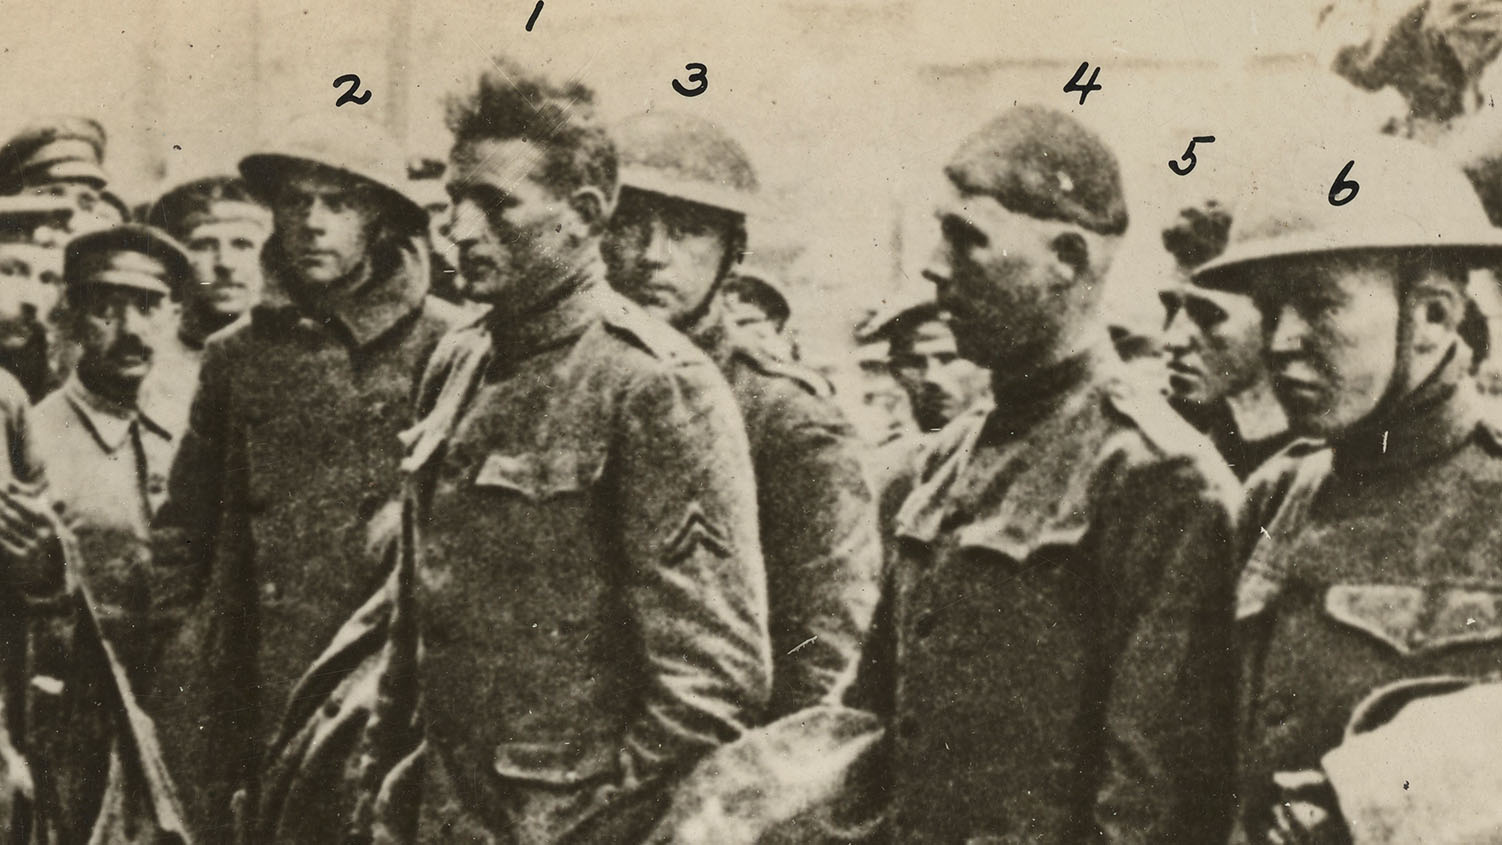 Read Halyburton and Grimsley – Story of U.S.’s First POWs in WWI